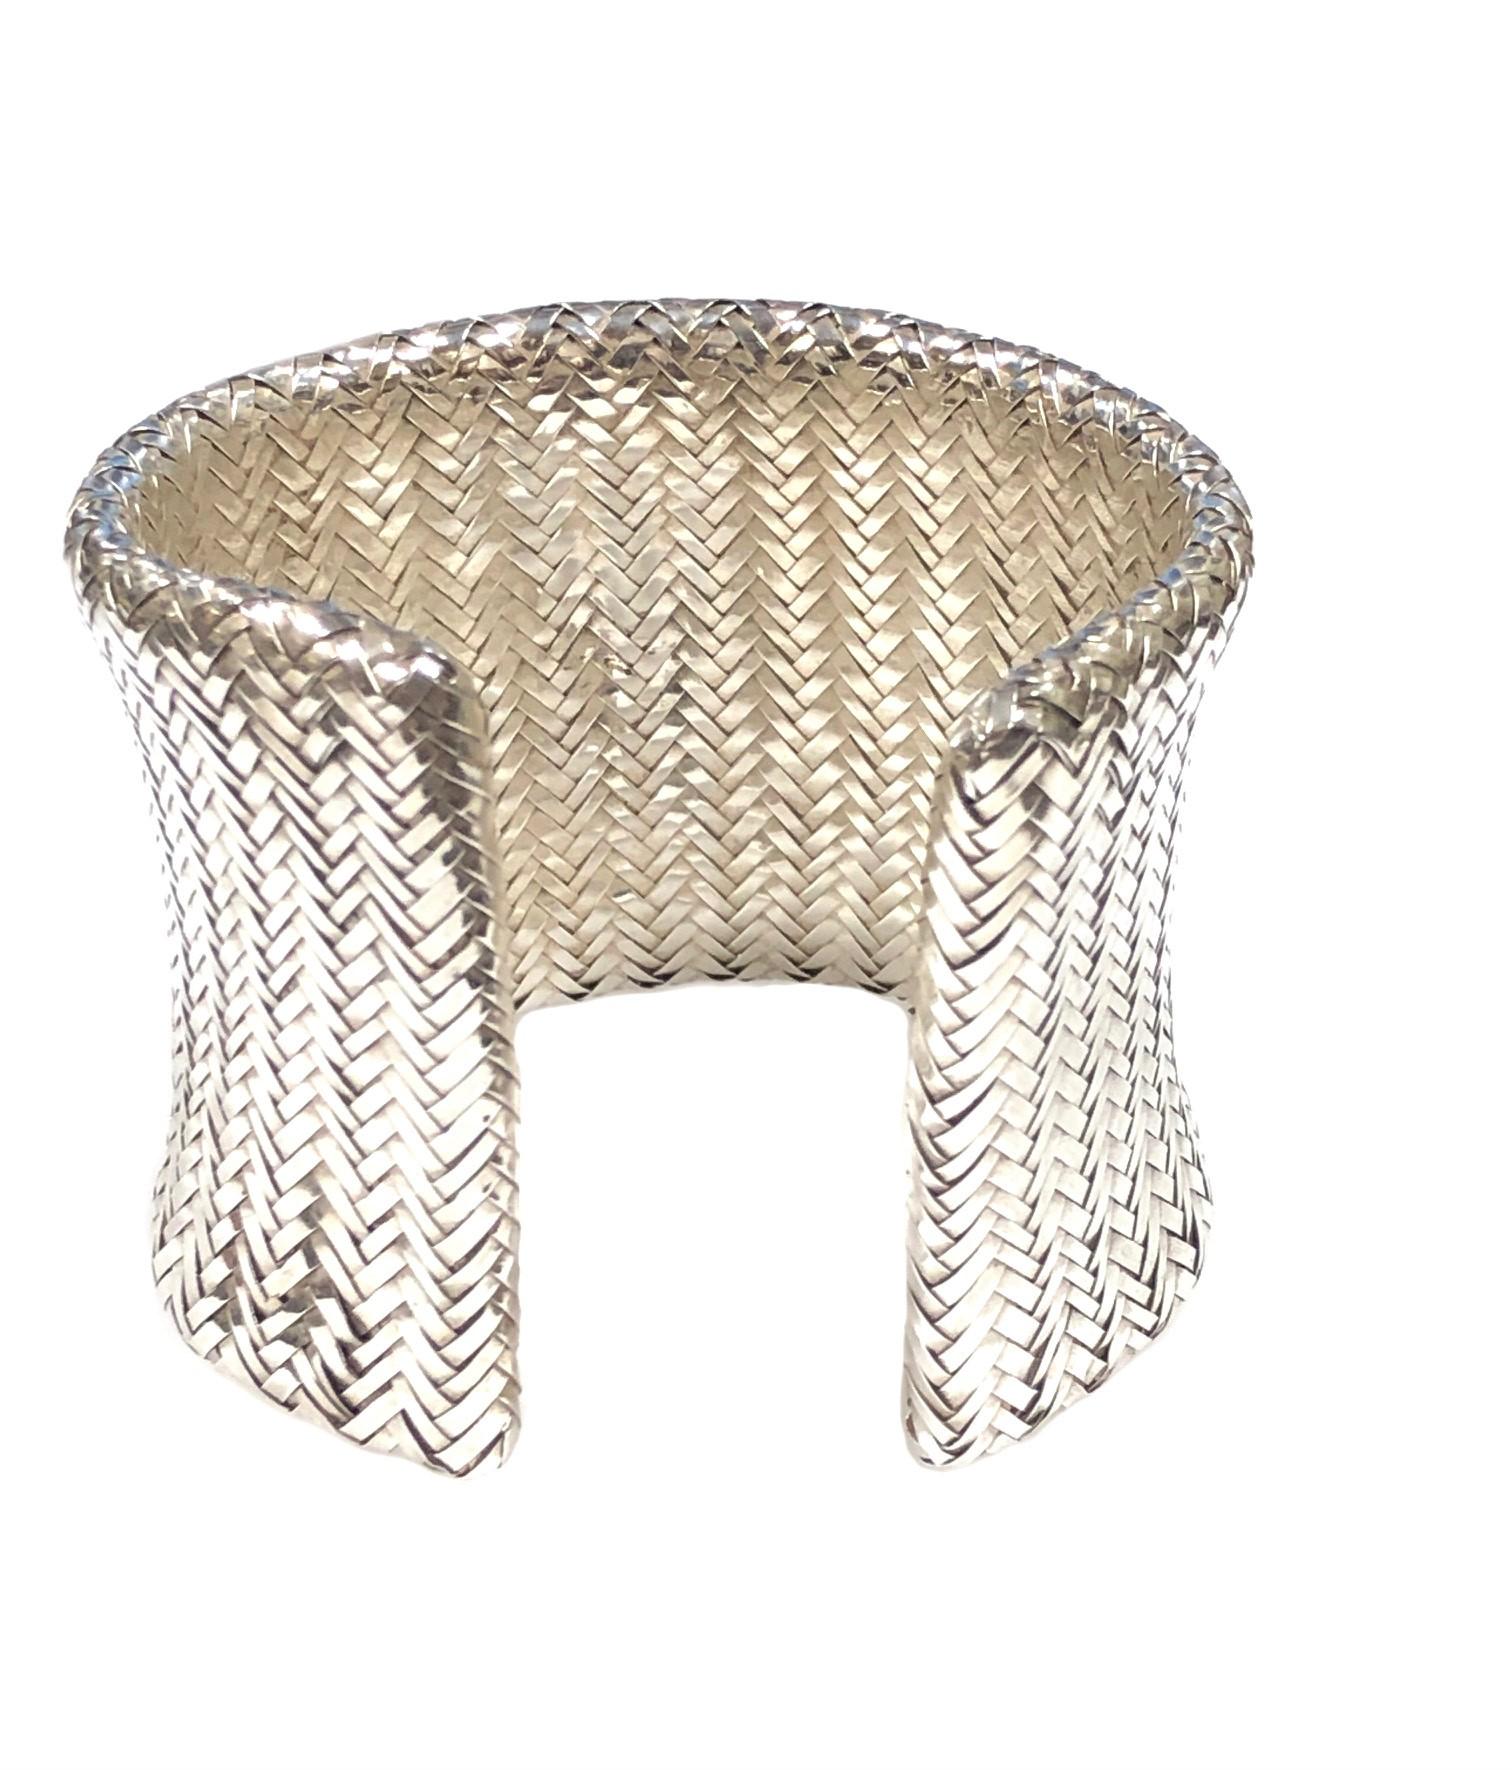 Circa 1980s Angela Cummings Sterling Silver Woven Mesh Cuff Bracelet. Measuring 2 Inches wide with an opening of 7/8 inches, a bit flexible to fit most any wrist, approximate inside measurement 7 inches. Comes in original Angela Cummings box, this